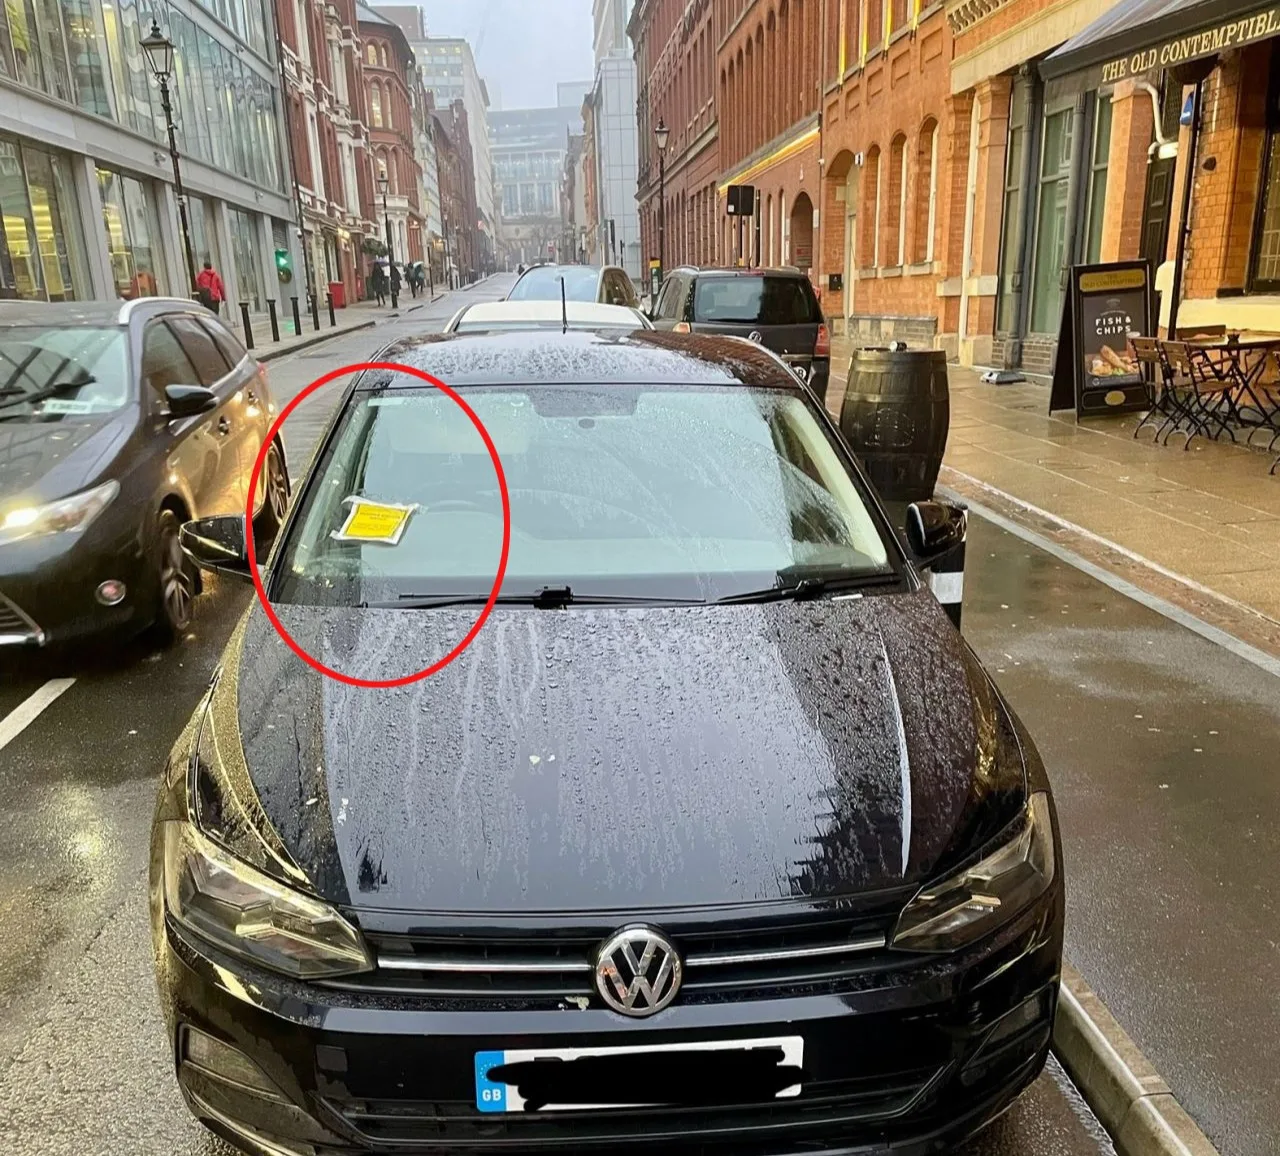 the car with fake parking ticket by prankster work crew fooled a colleague into thinking he'd received a parking ticket, leaving a humorous message on his windscreen.